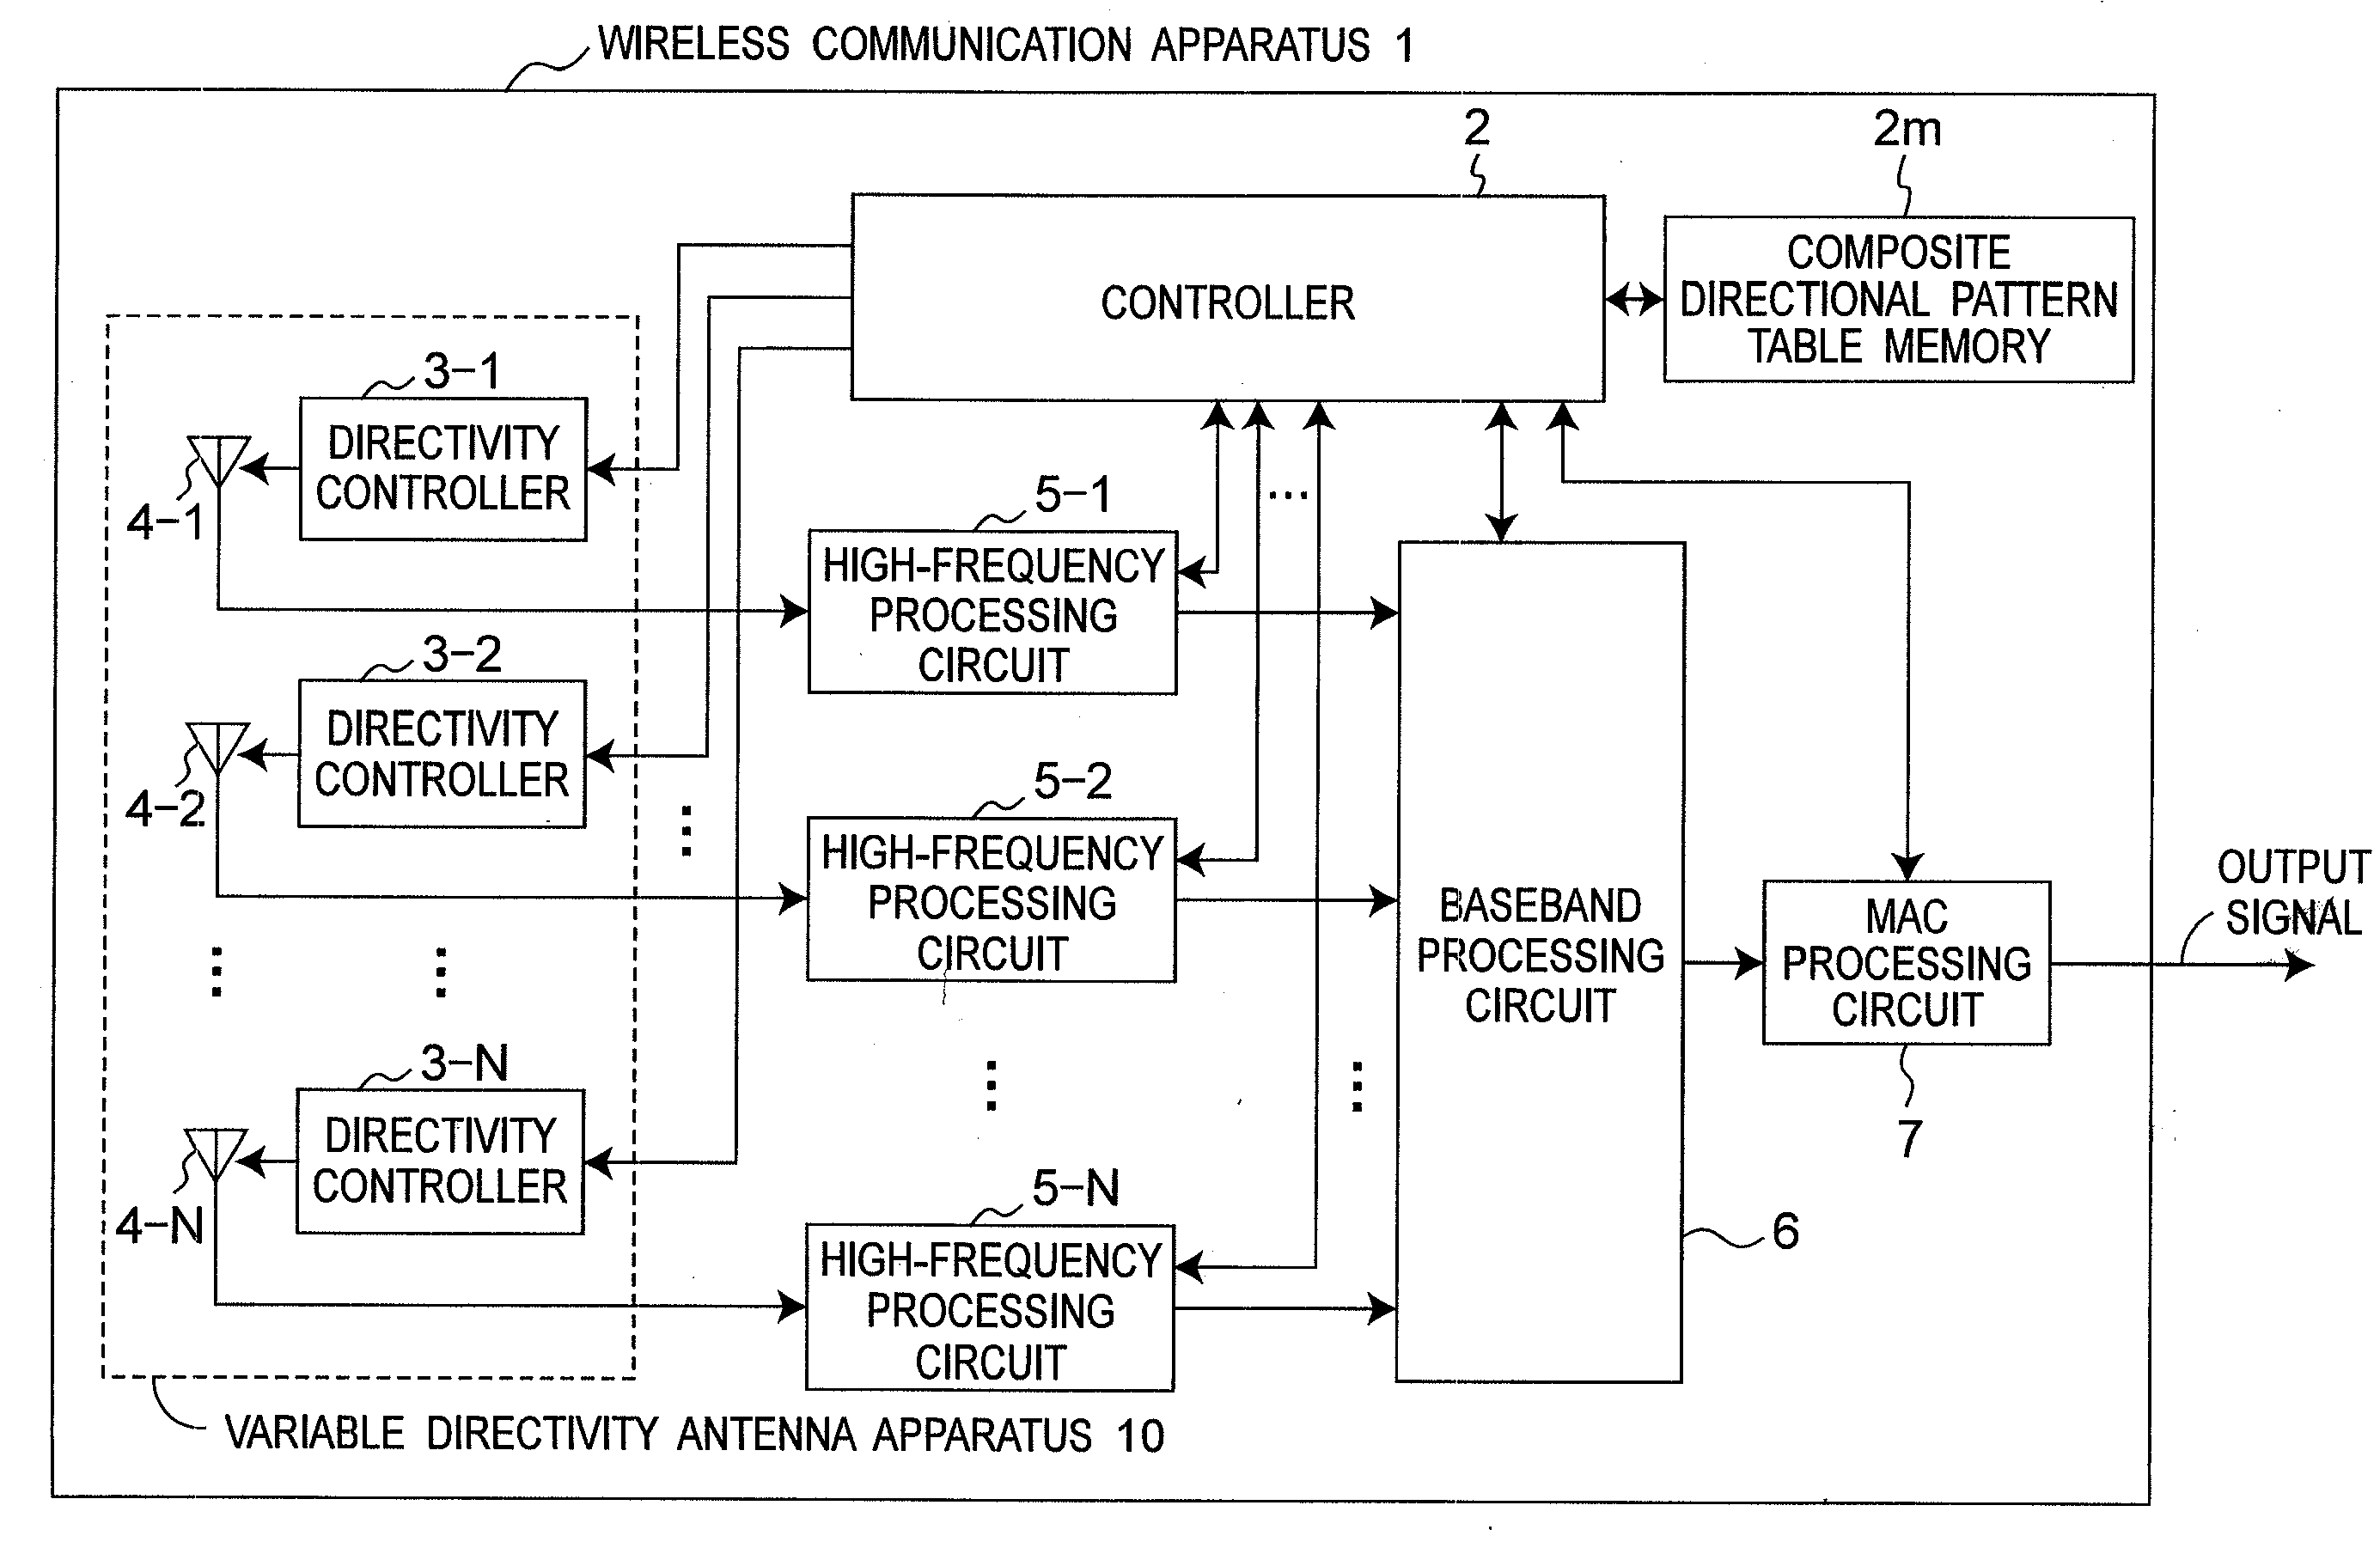 Wireless communication apparatus for changing directional pattern of variable directivity antenna according to variations in radio wave propagation enviroment